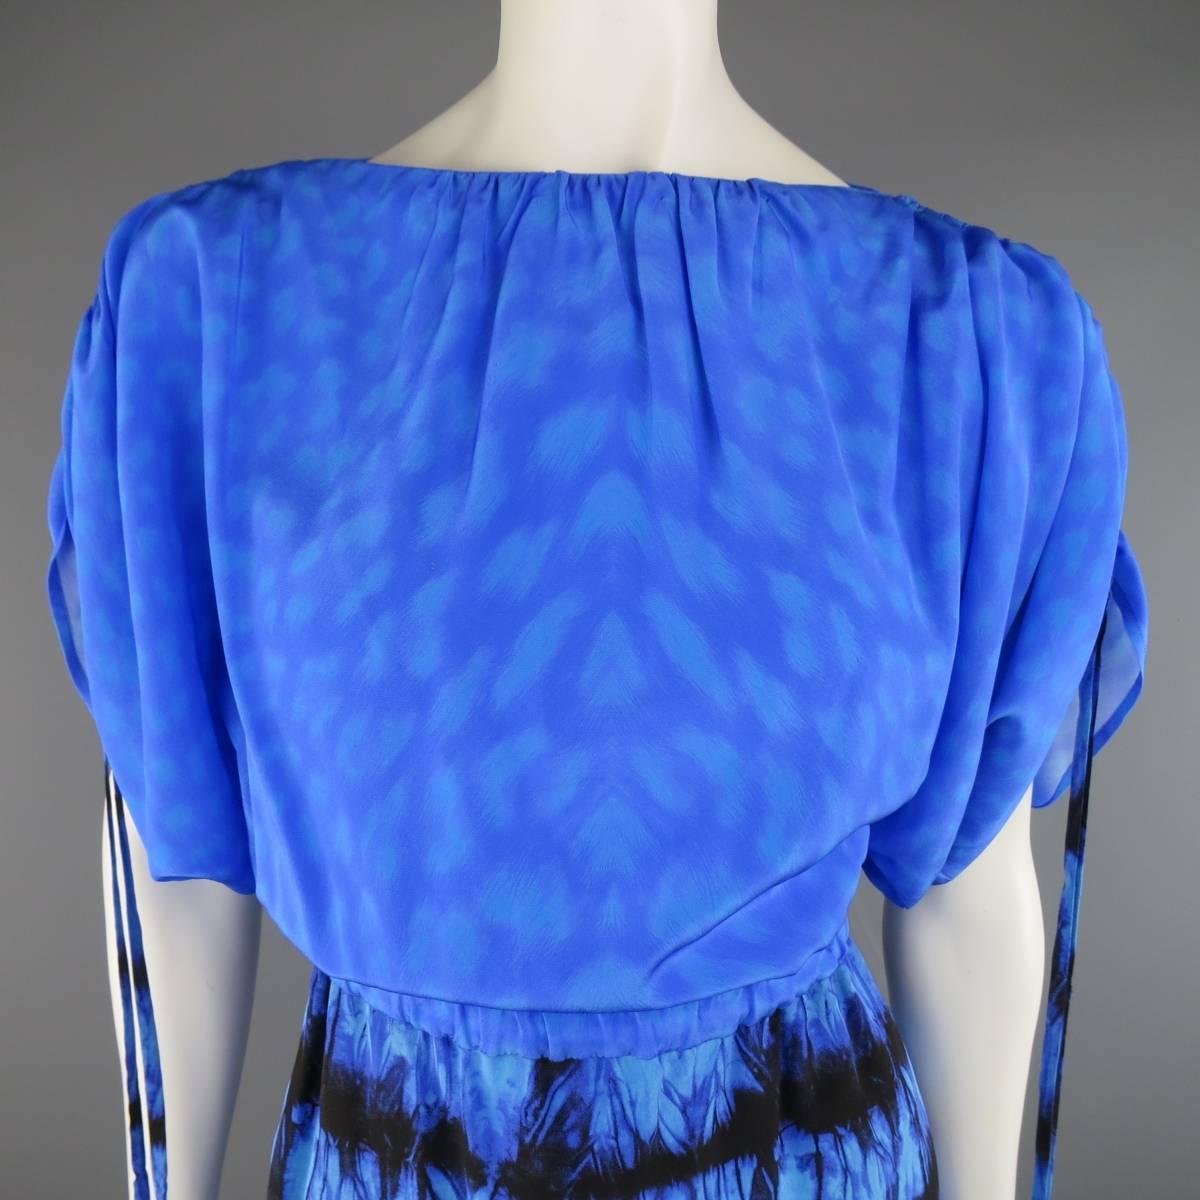 ROBERTO CAVALLI mini dress in a light weight silk crepe featuring a blue cheetah blousy fit top with gathered boat neck and drawstring bat wing sleeves, elastic waistband, and black tie die print mini skirt. Made in Italy.
 
Excellent Pre-Owned